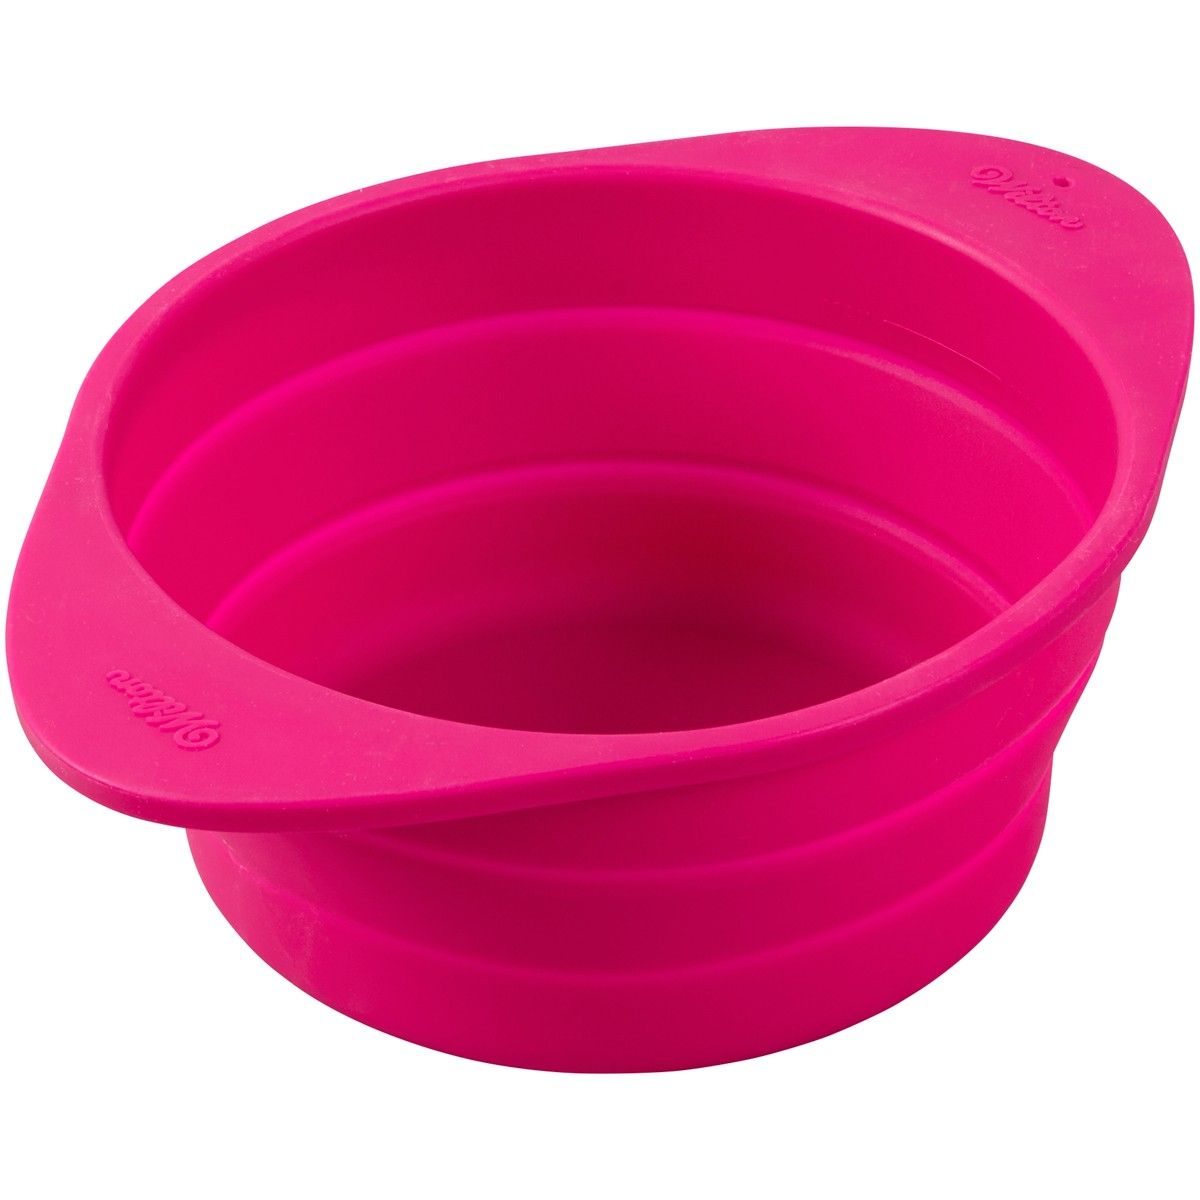 Wilton Candy Melts Collapsible Melting Bowl